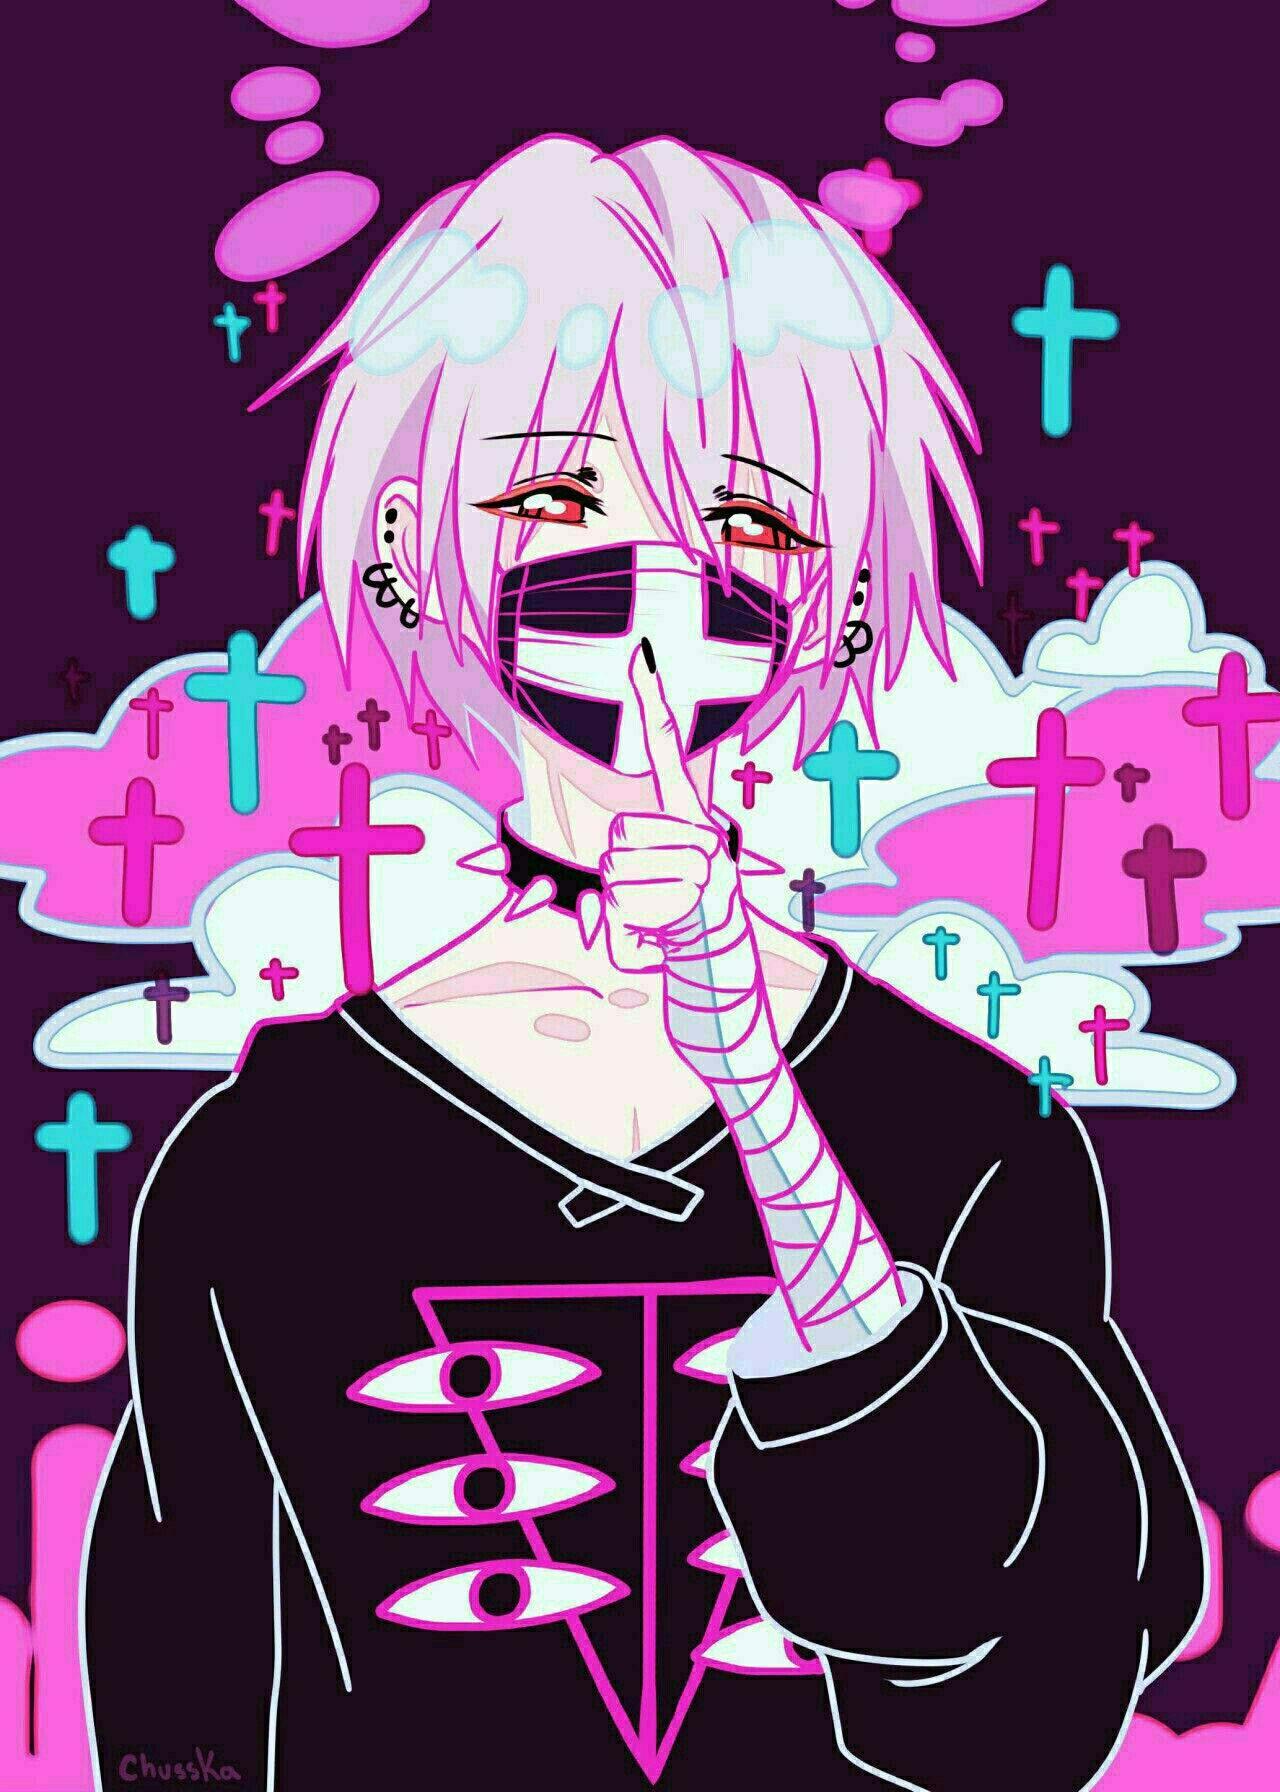 27 Images About Pastel Goth Anime On We Heart It  Pastel Goth Anime Bunny  PNG Image  Transparent PNG Free Download on SeekPNG